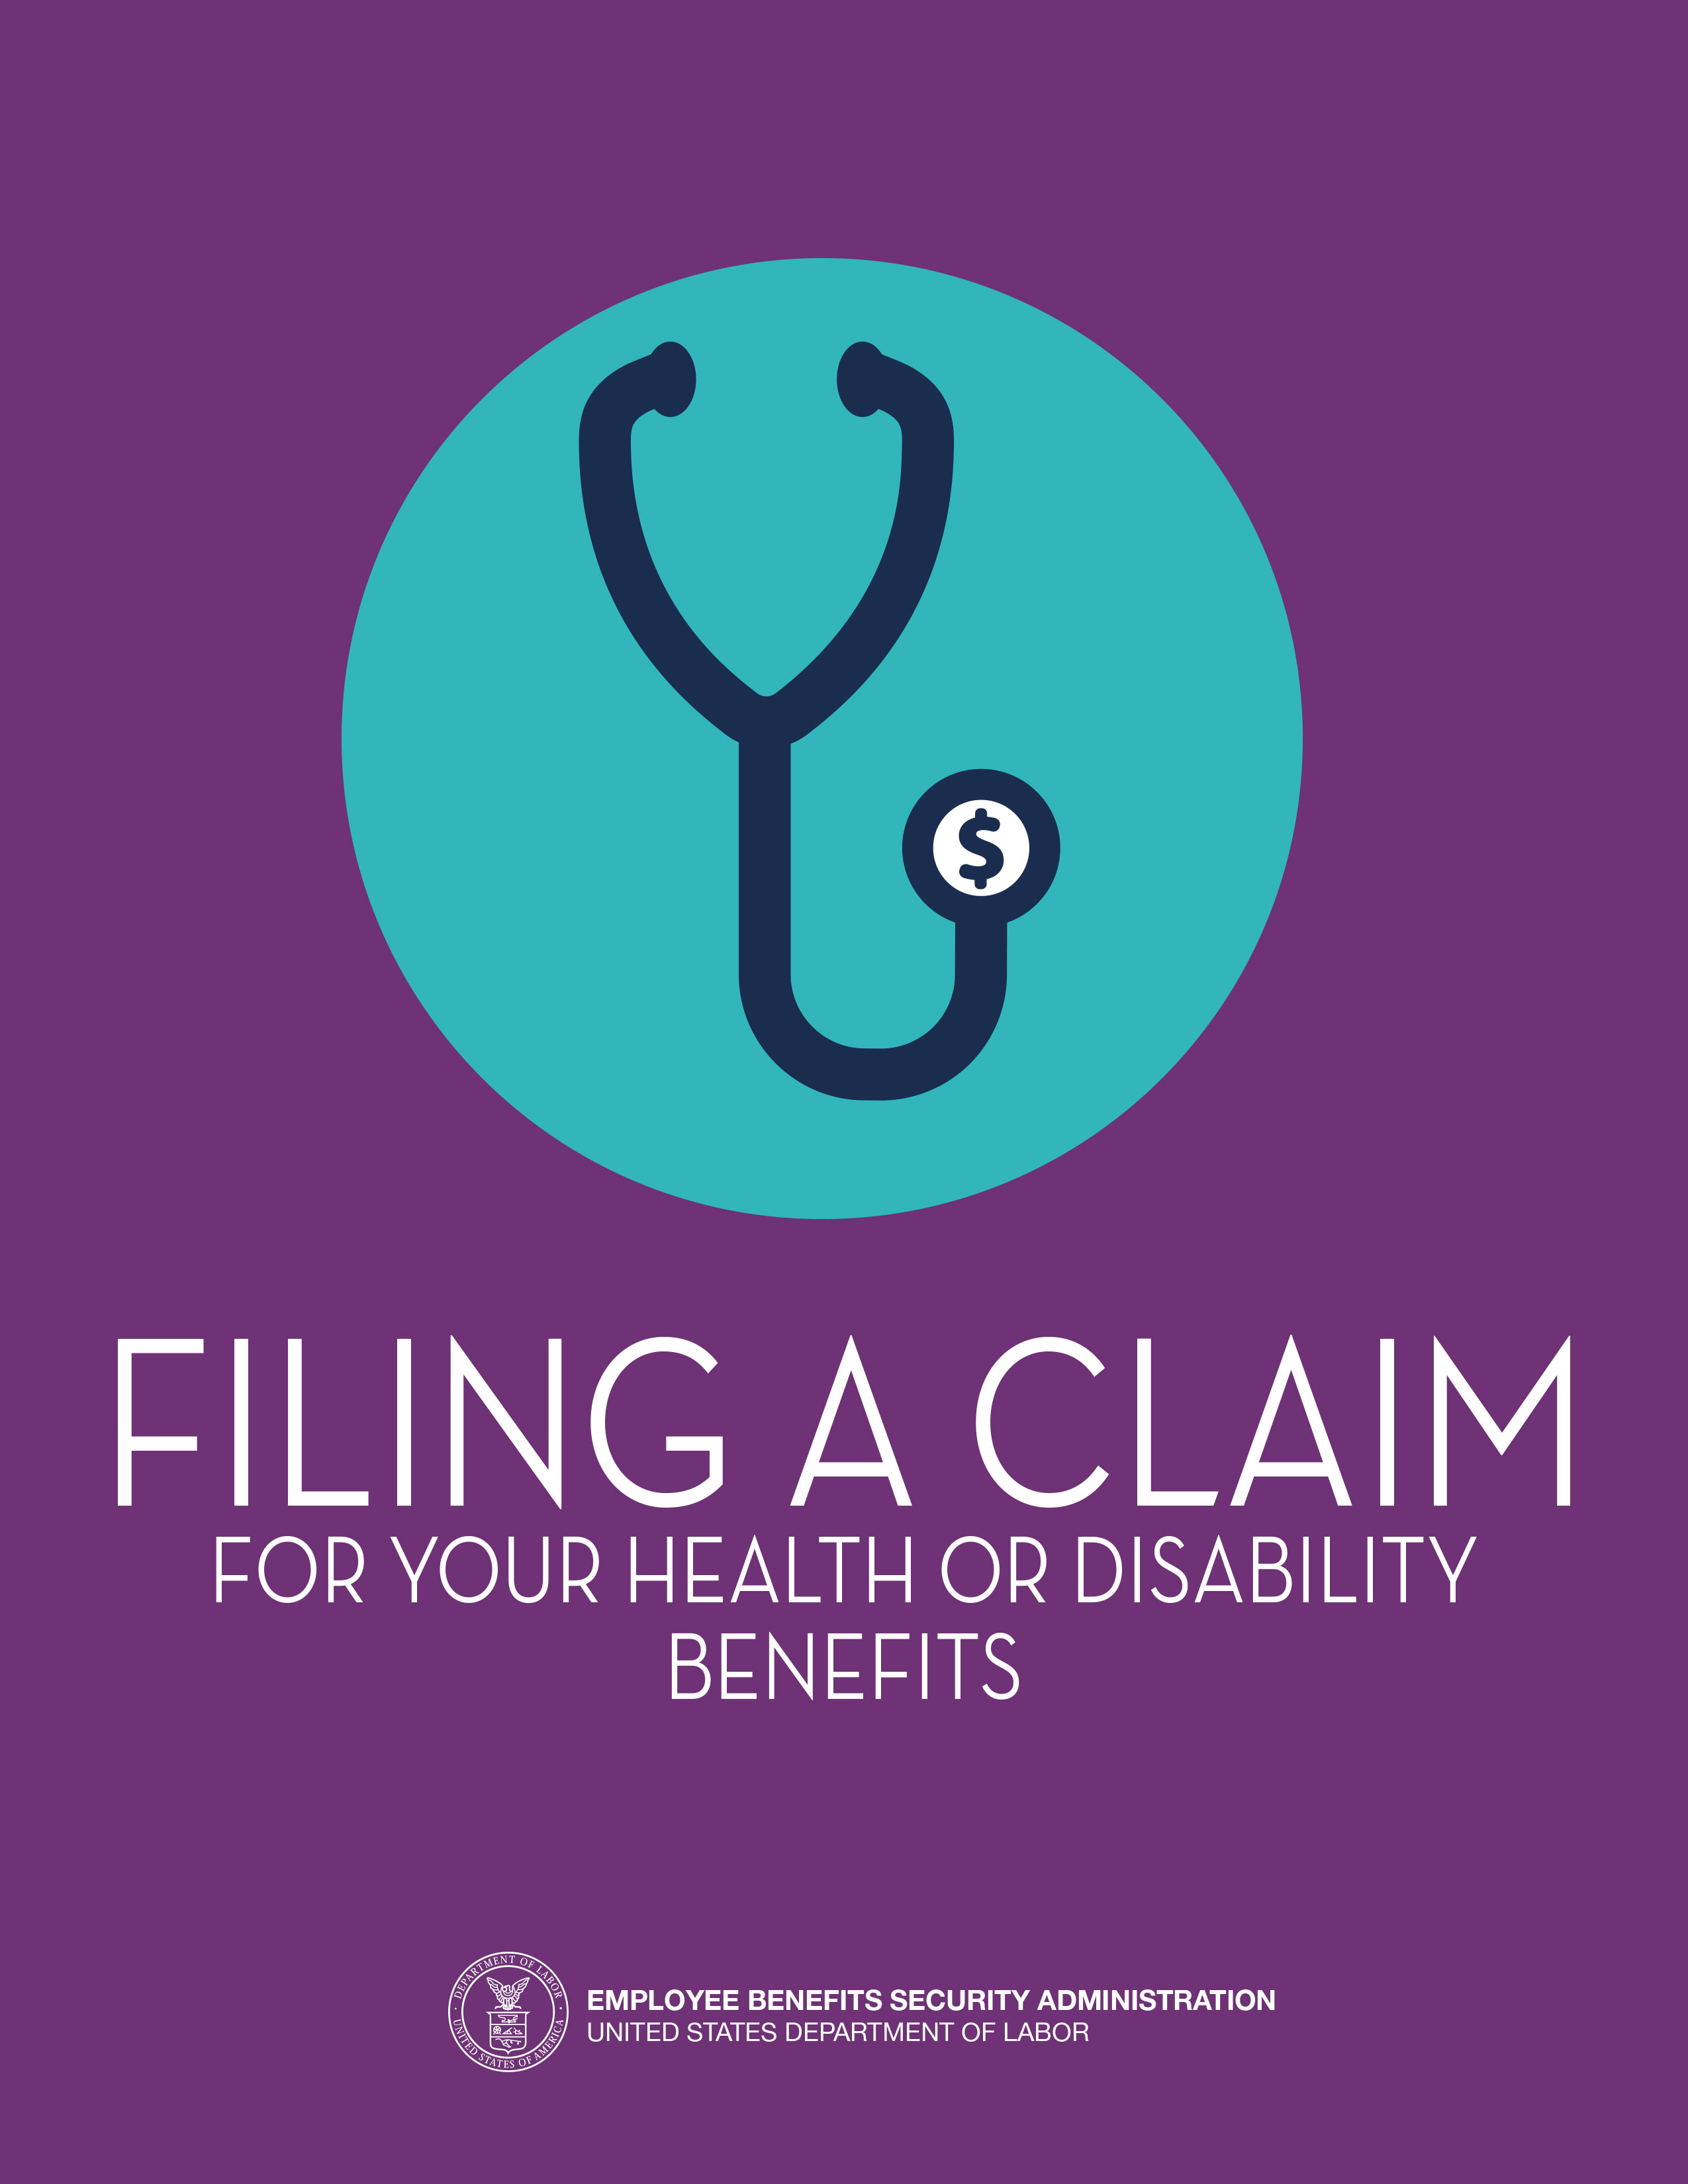 Filing a Claim for Your Health or Disability Benefits.  To order copies call 1-866-444-3272.